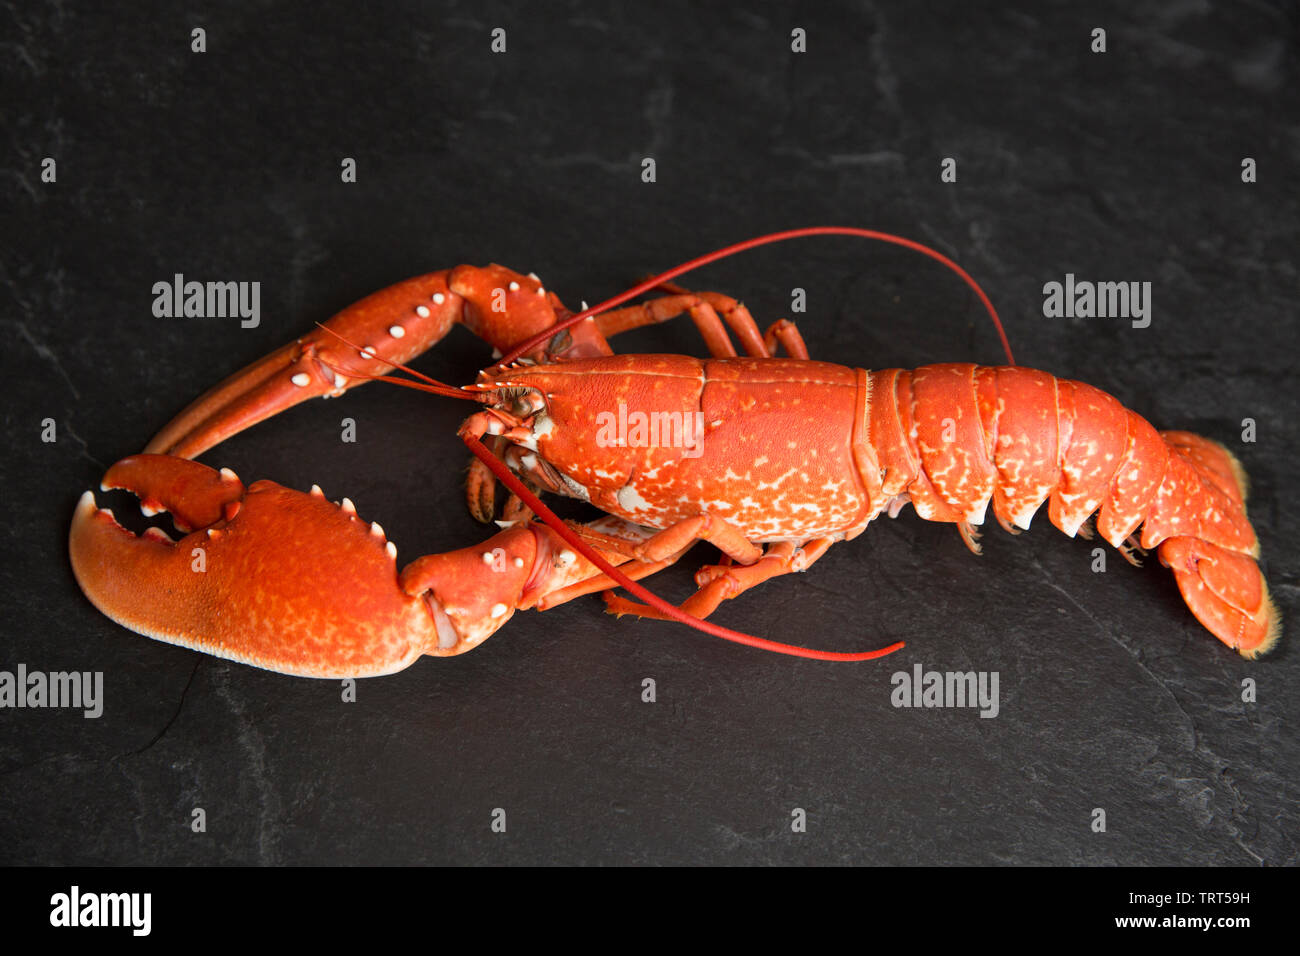 A boiled, cooked lobster, Homarus gammarus, that was caught in a lobster pot set in the English Channel. Homarus gammarus is also known as the common Stock Photo